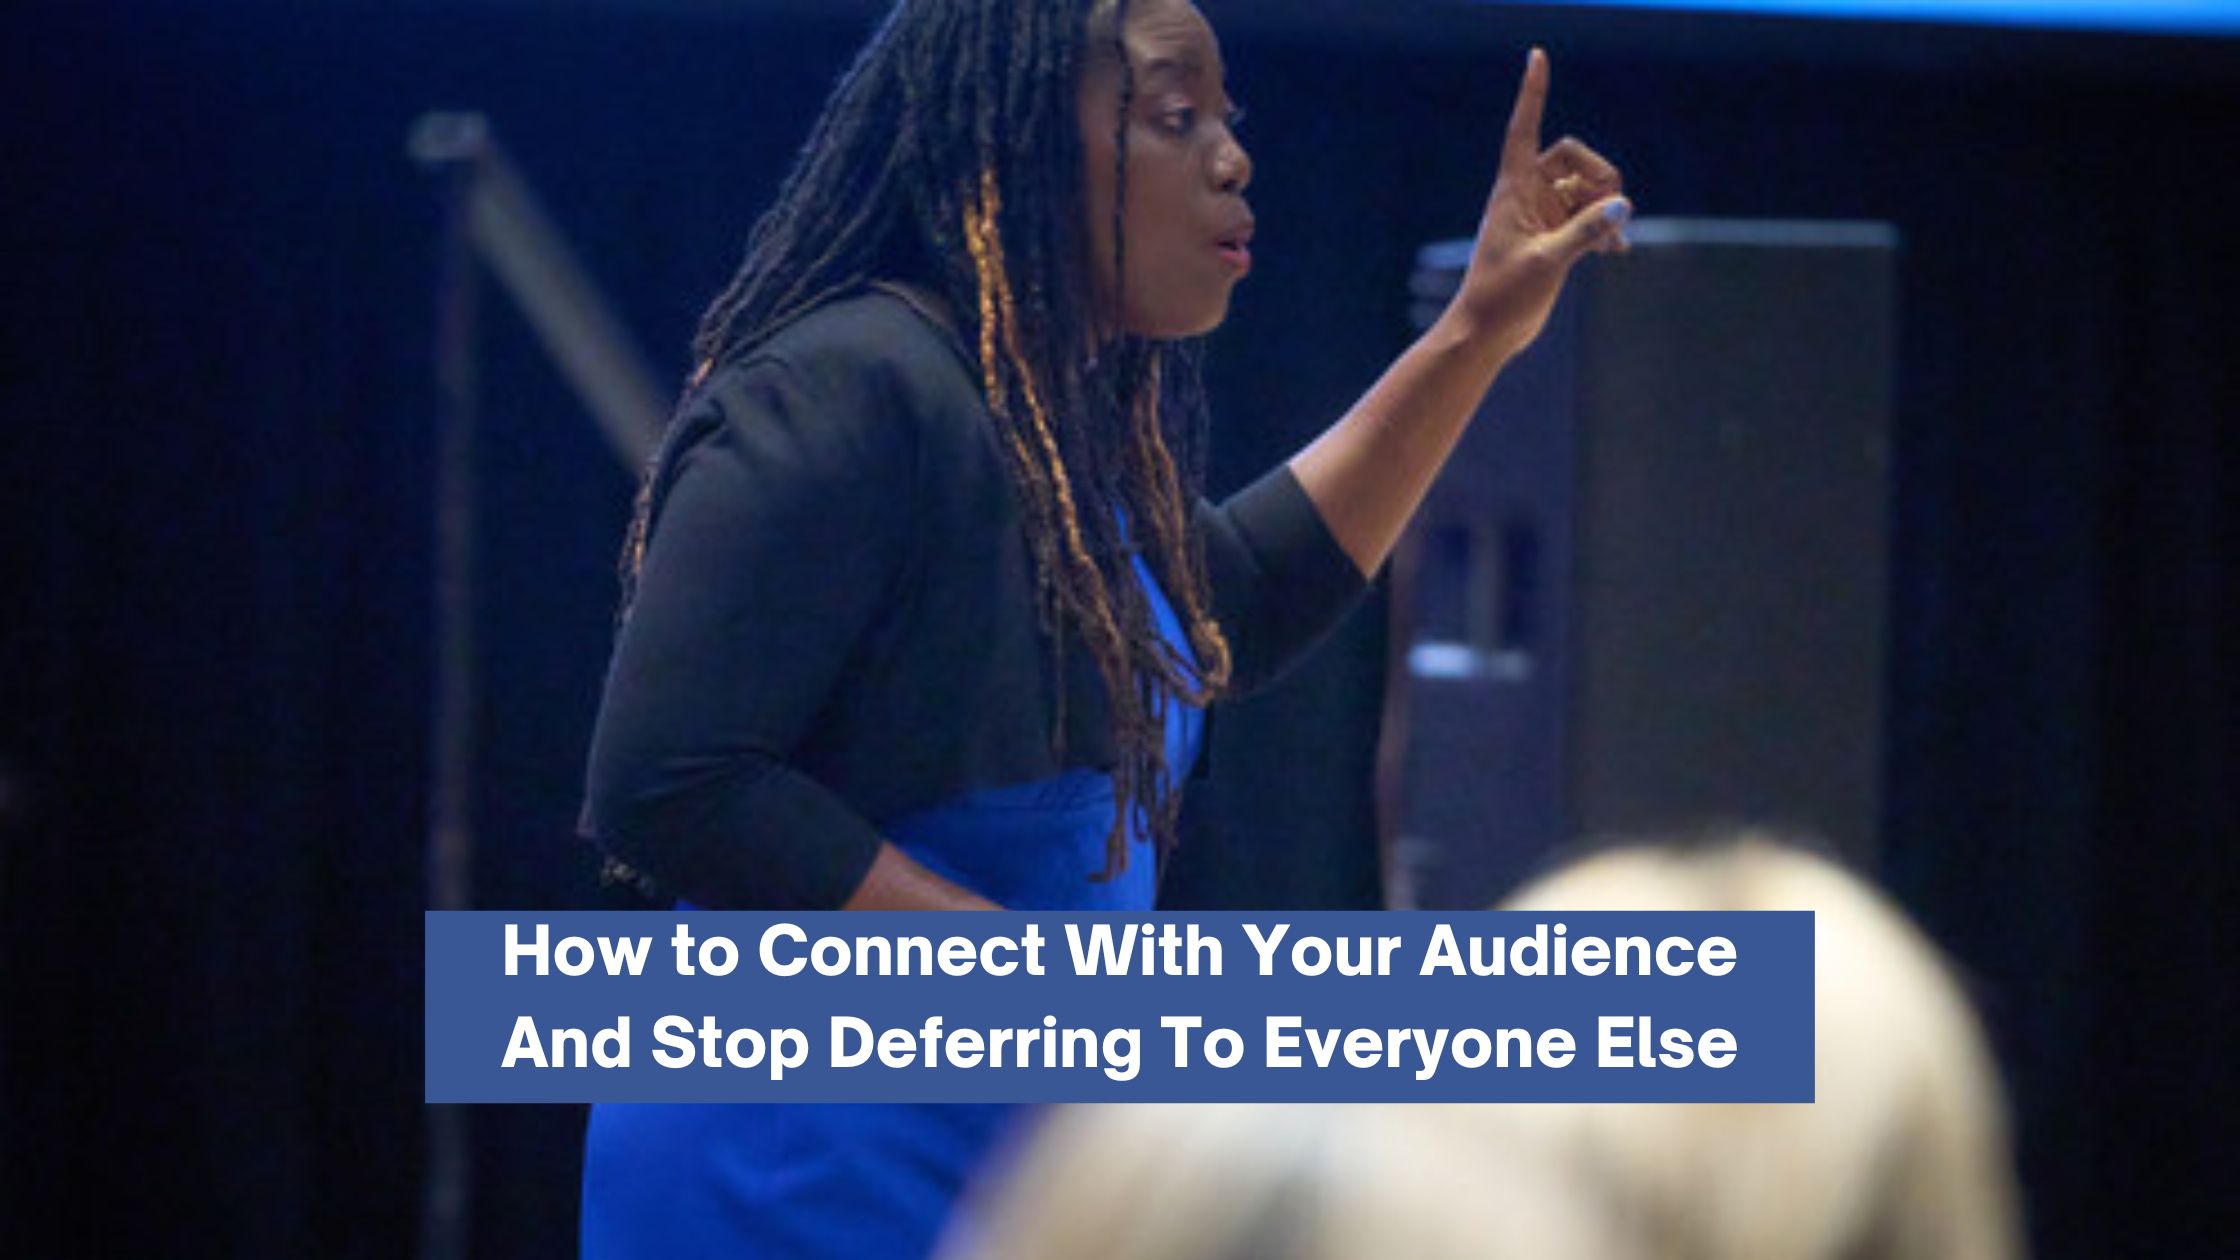 How to Connect With Your Audience And Stop Deferring To Everyone Else